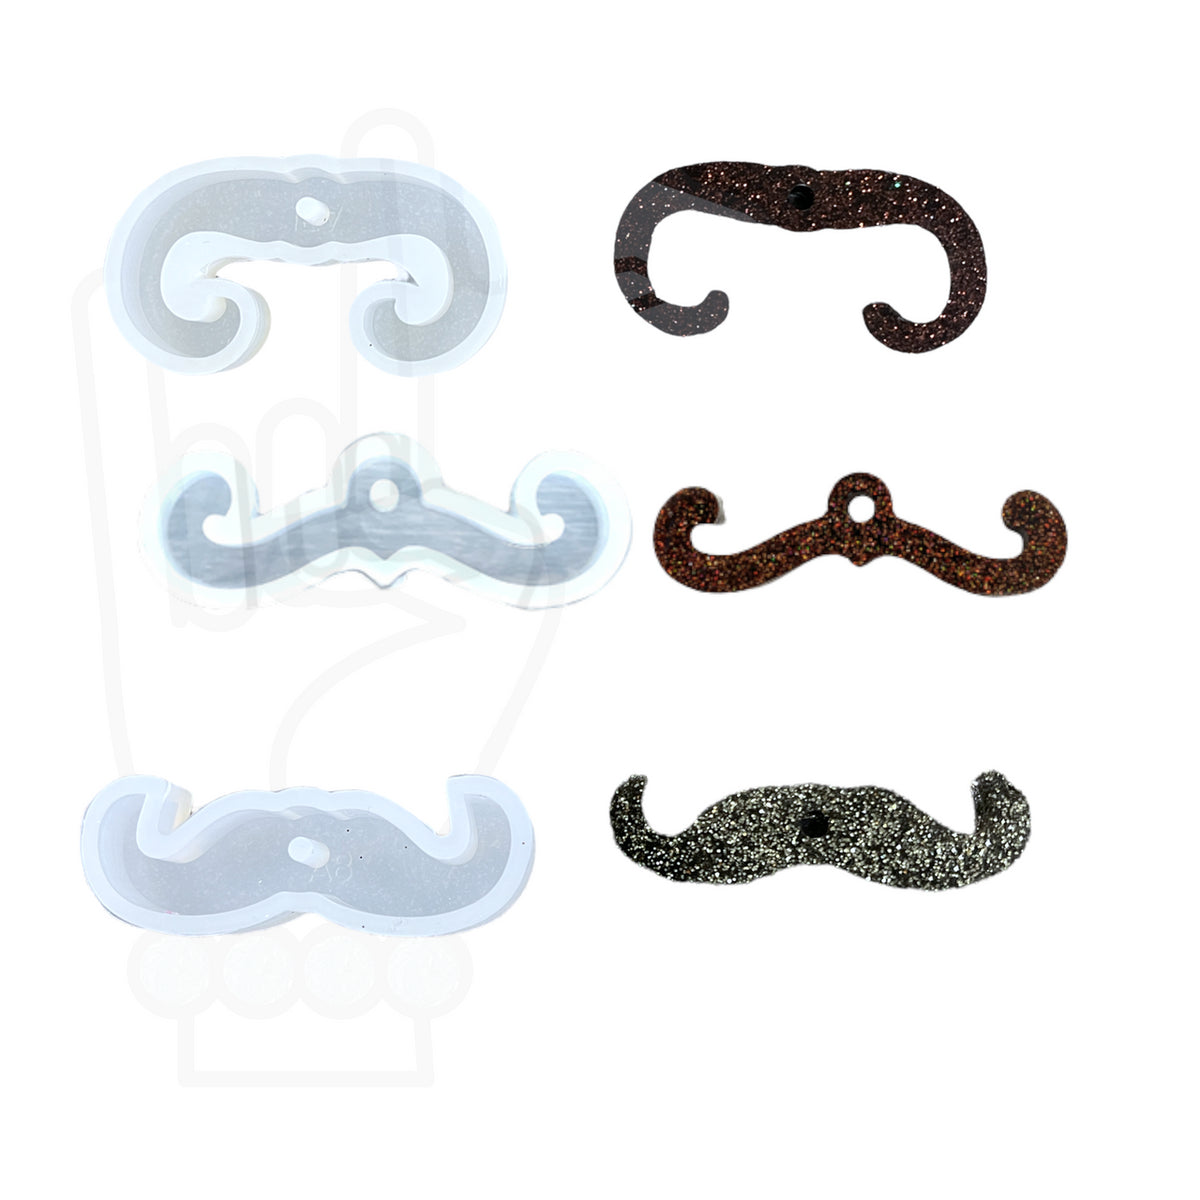 Mustache Mini Pendant or Keychain Charm Silicone Mold Set of 3 for UV or Epoxy Resin Art